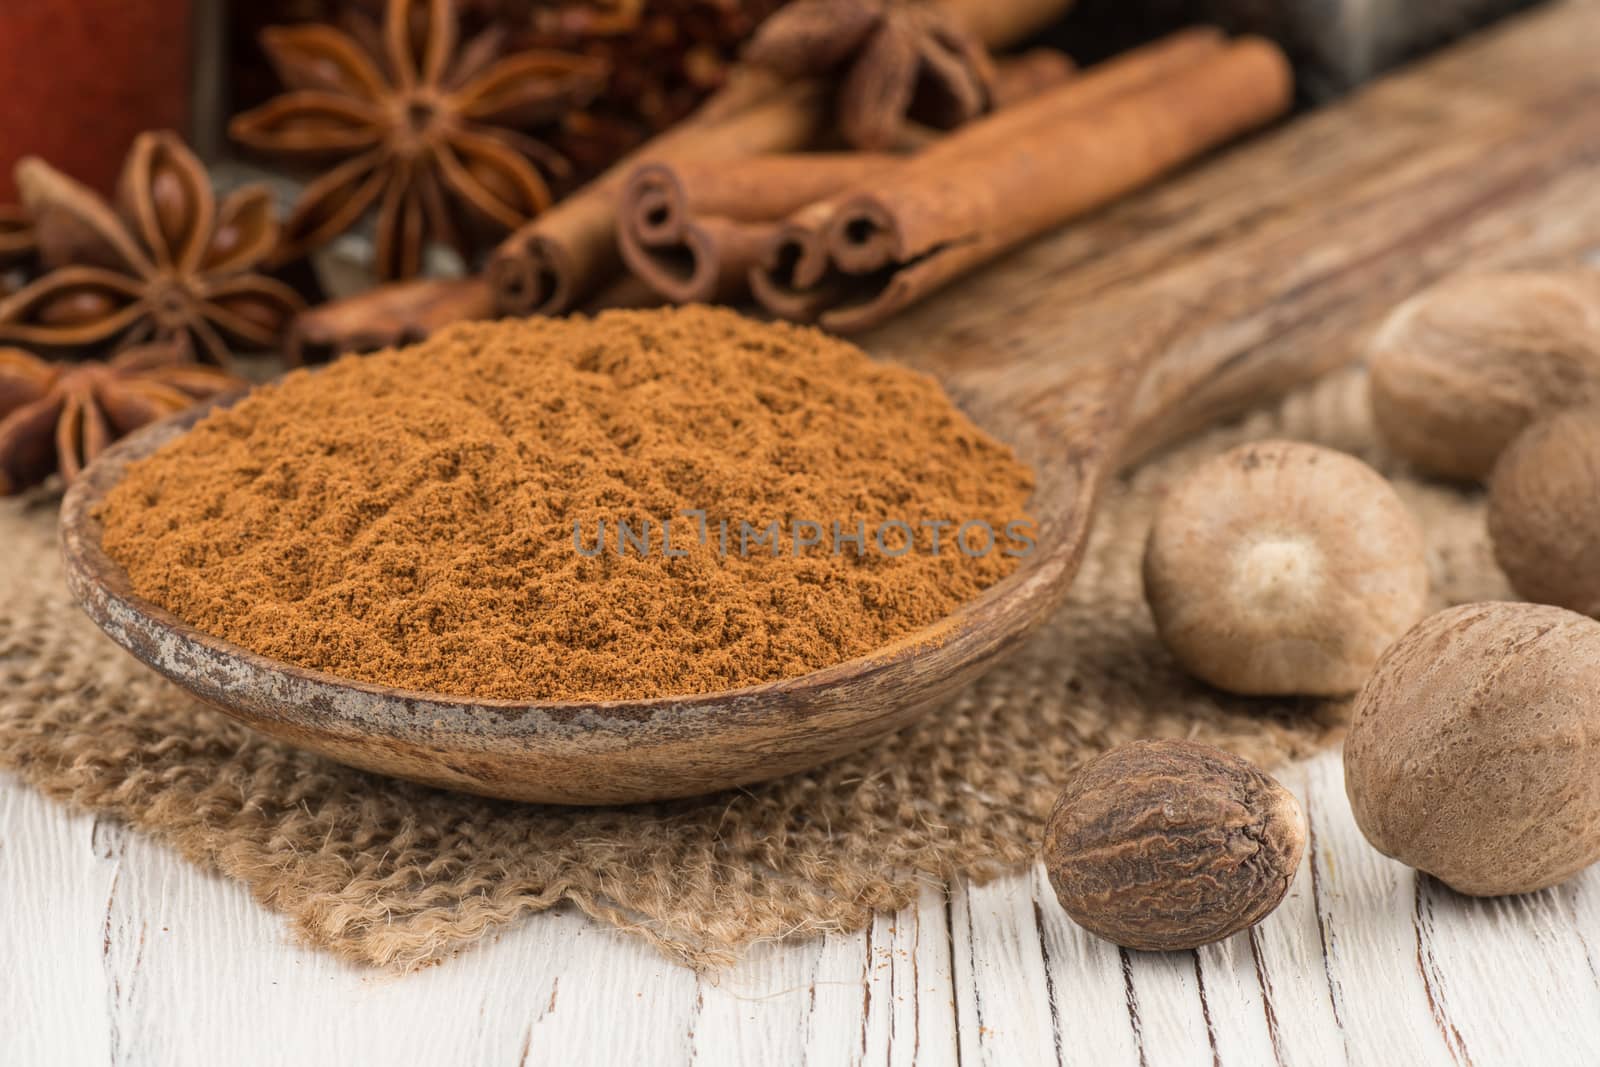 Ground cinnamon in a wooden spoon on the old wooden background. by DGolbay